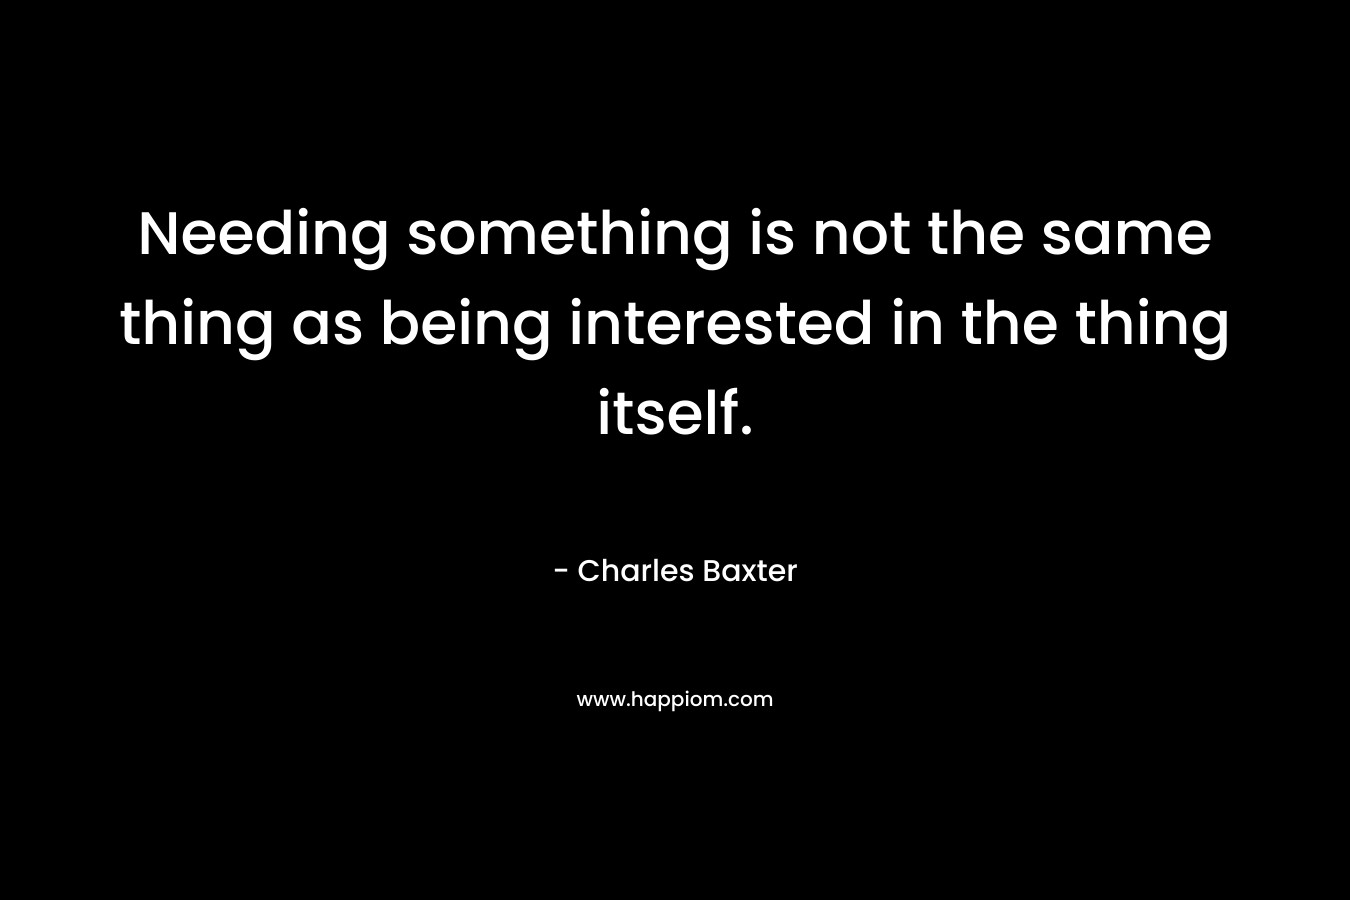 Needing something is not the same thing as being interested in the thing itself.